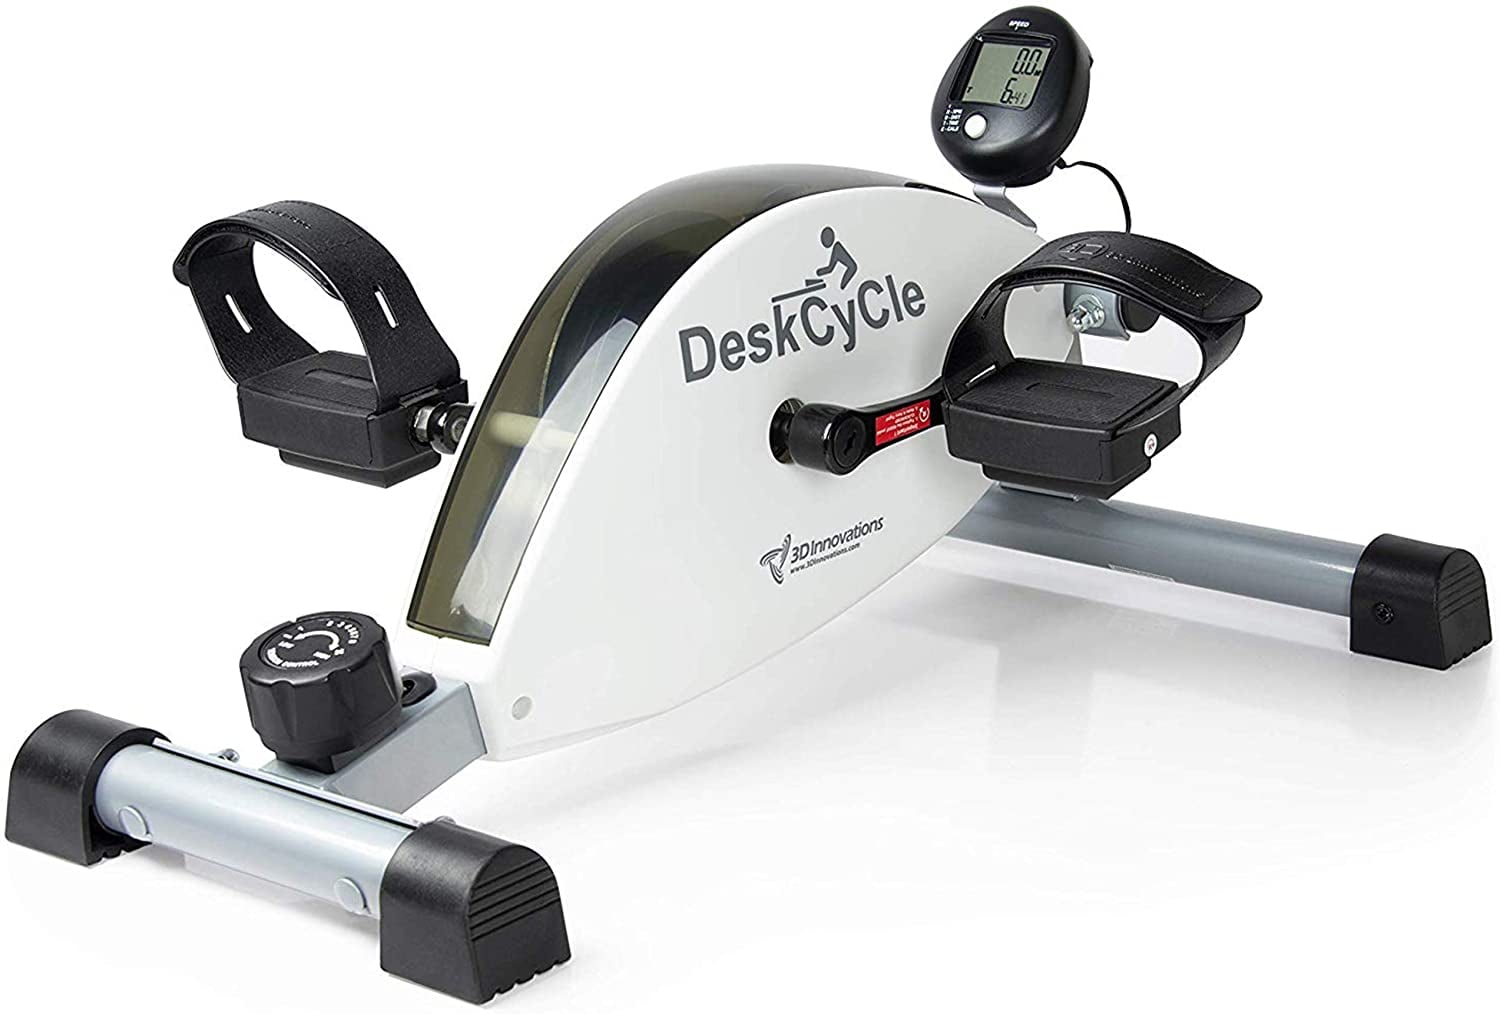 at your desk exercise equipment